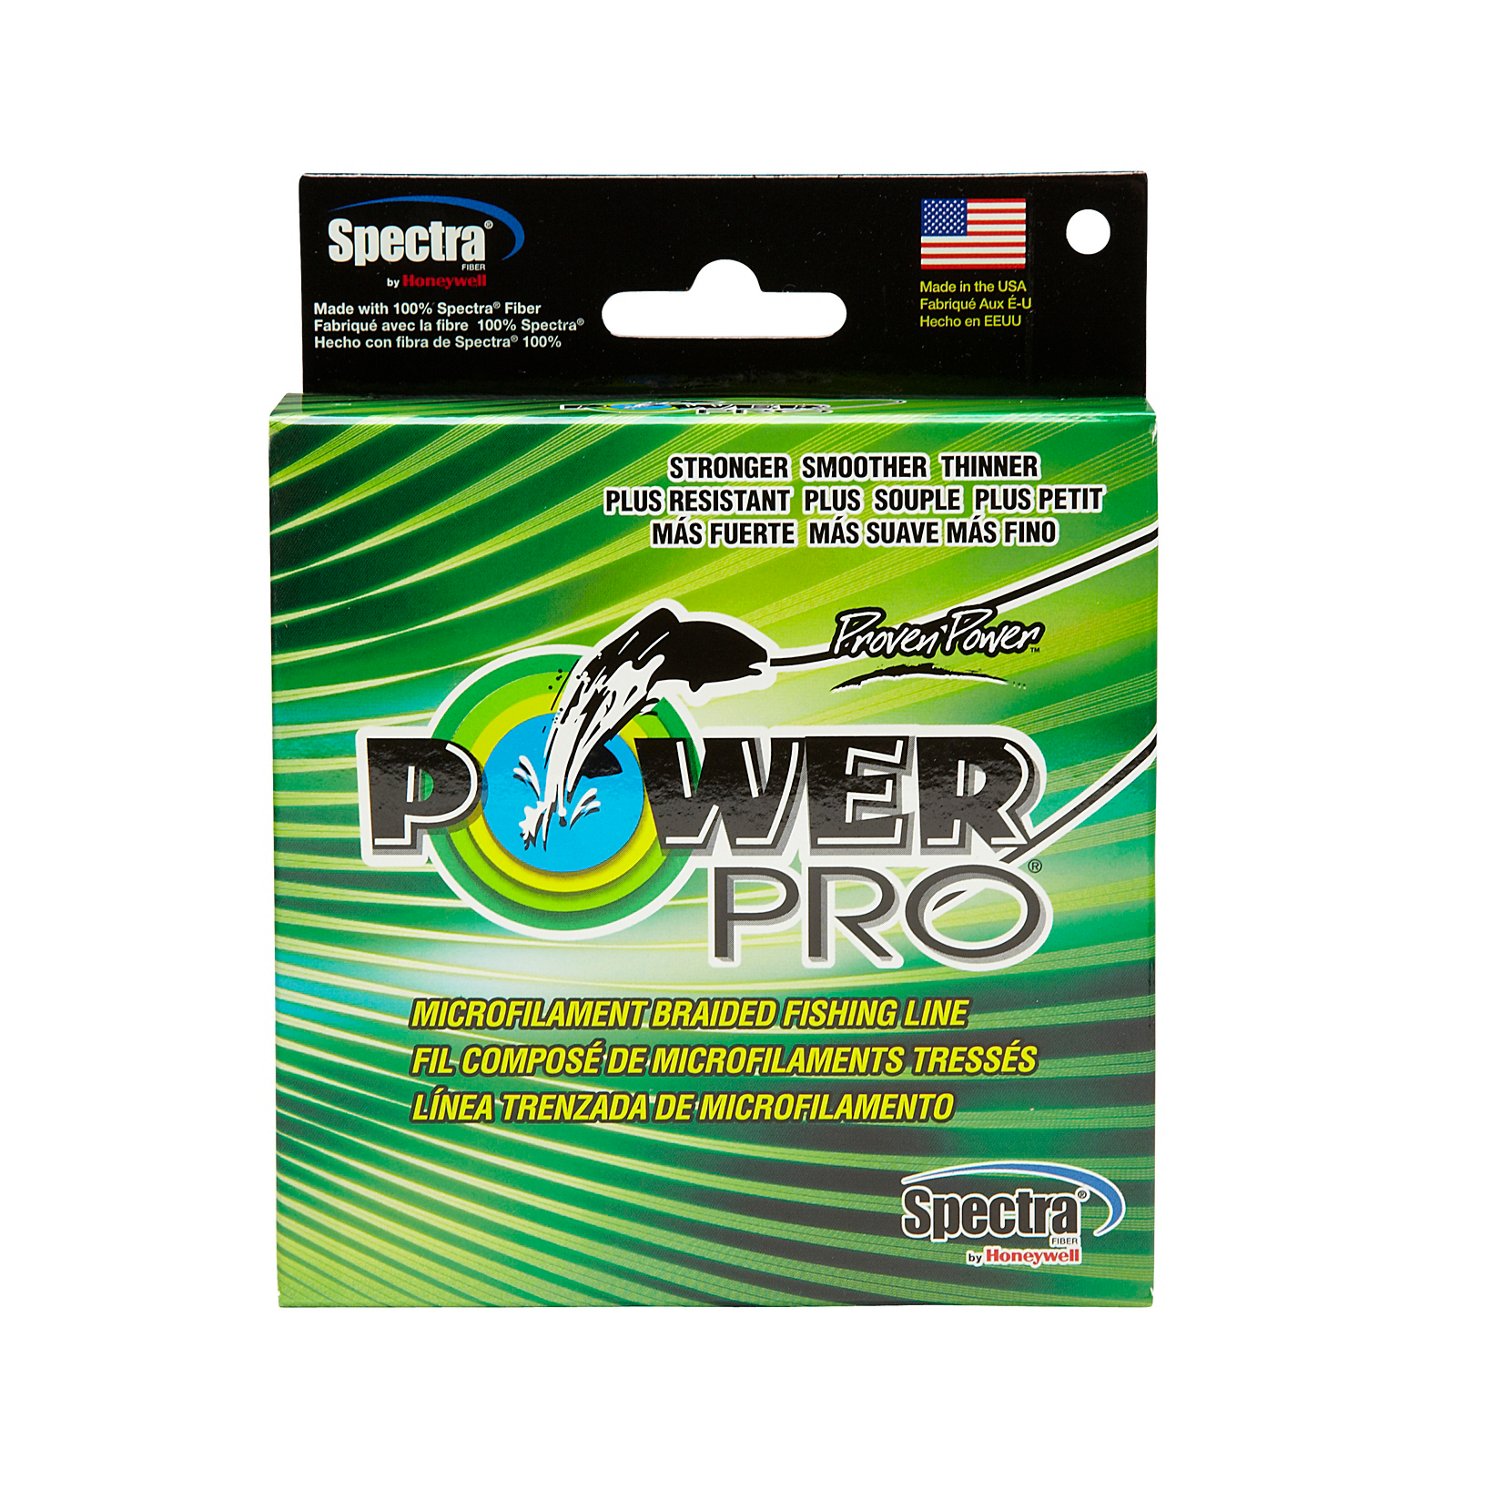 POWER PRO Spectra Braided Fishing Line, 10Lb, 300Yds, Green